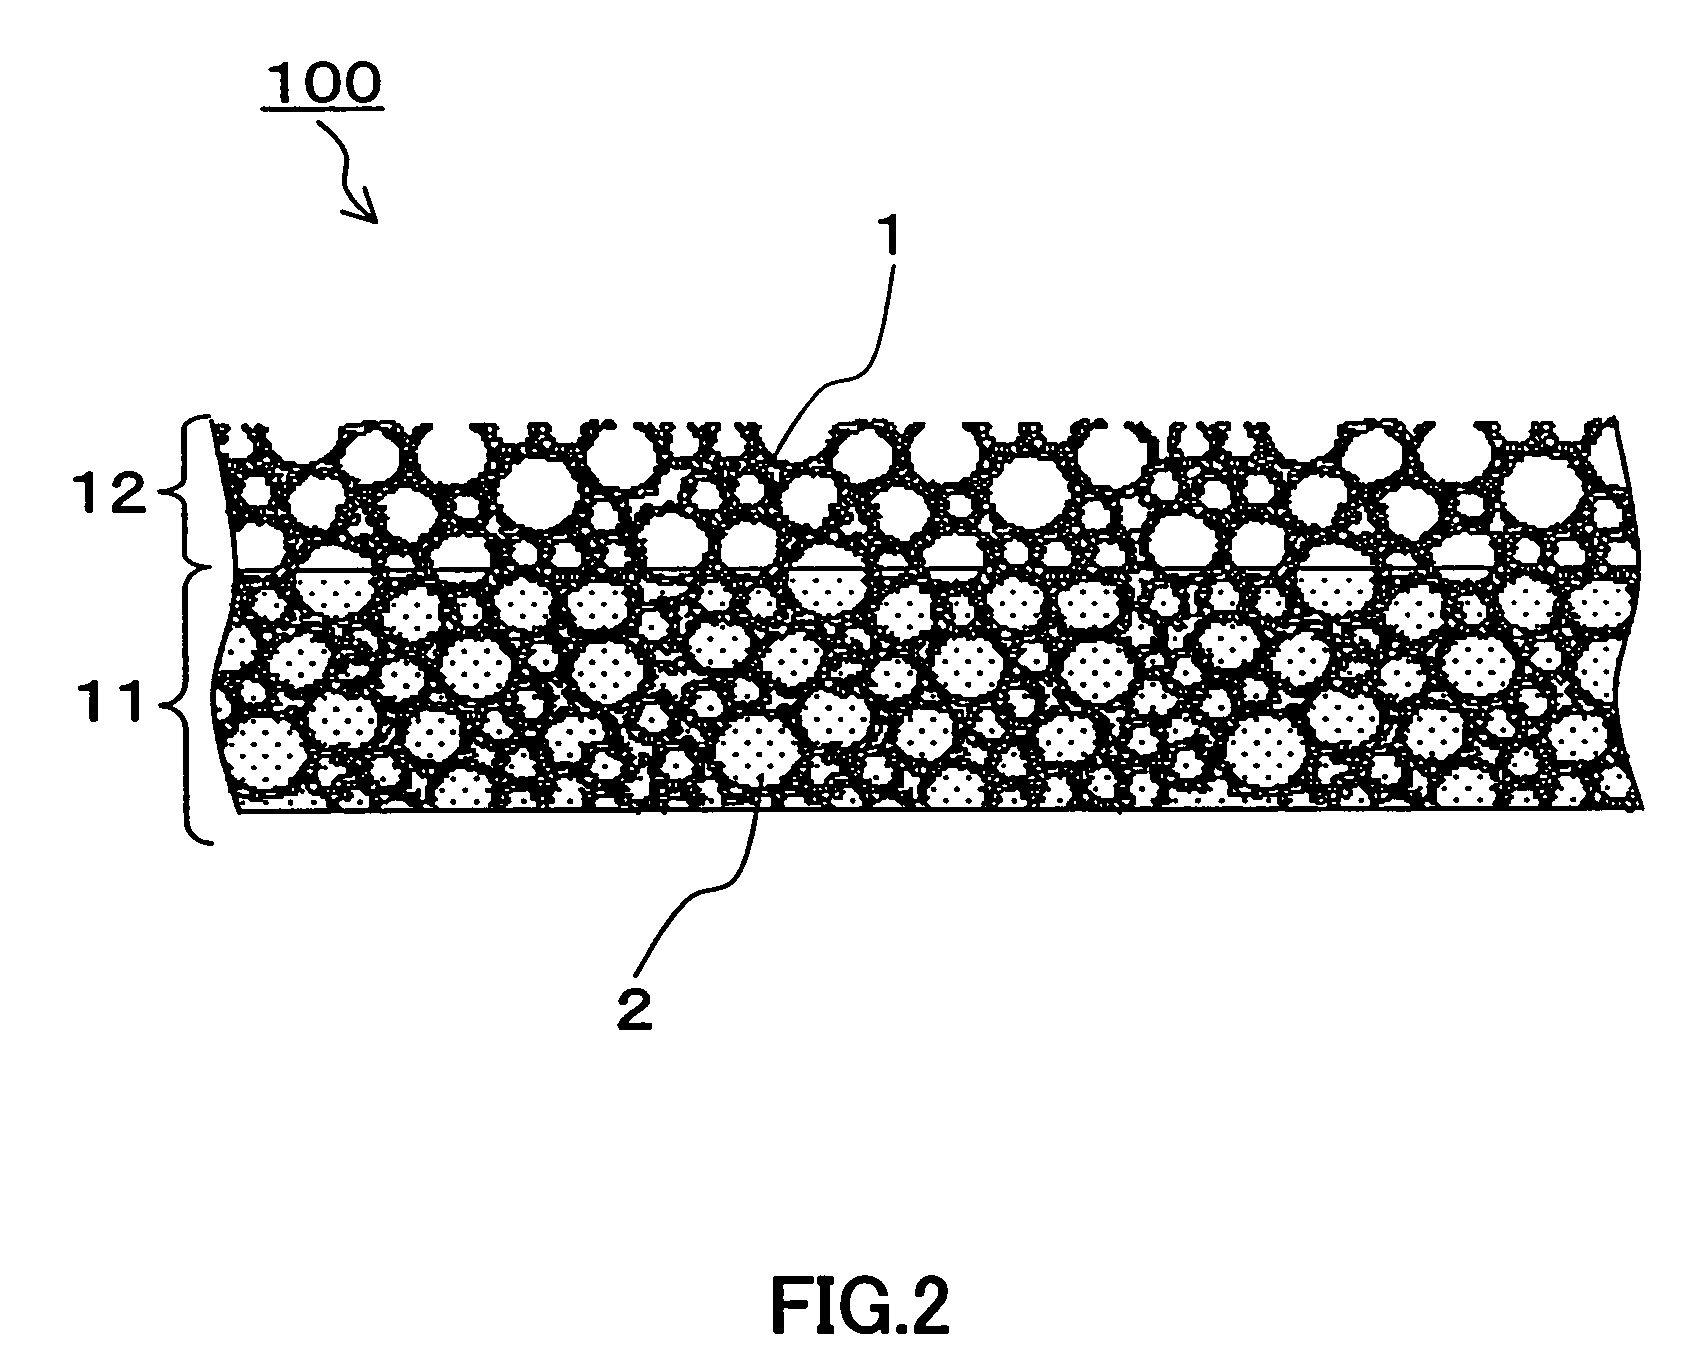 Method for manfacturing an acoustic matching member